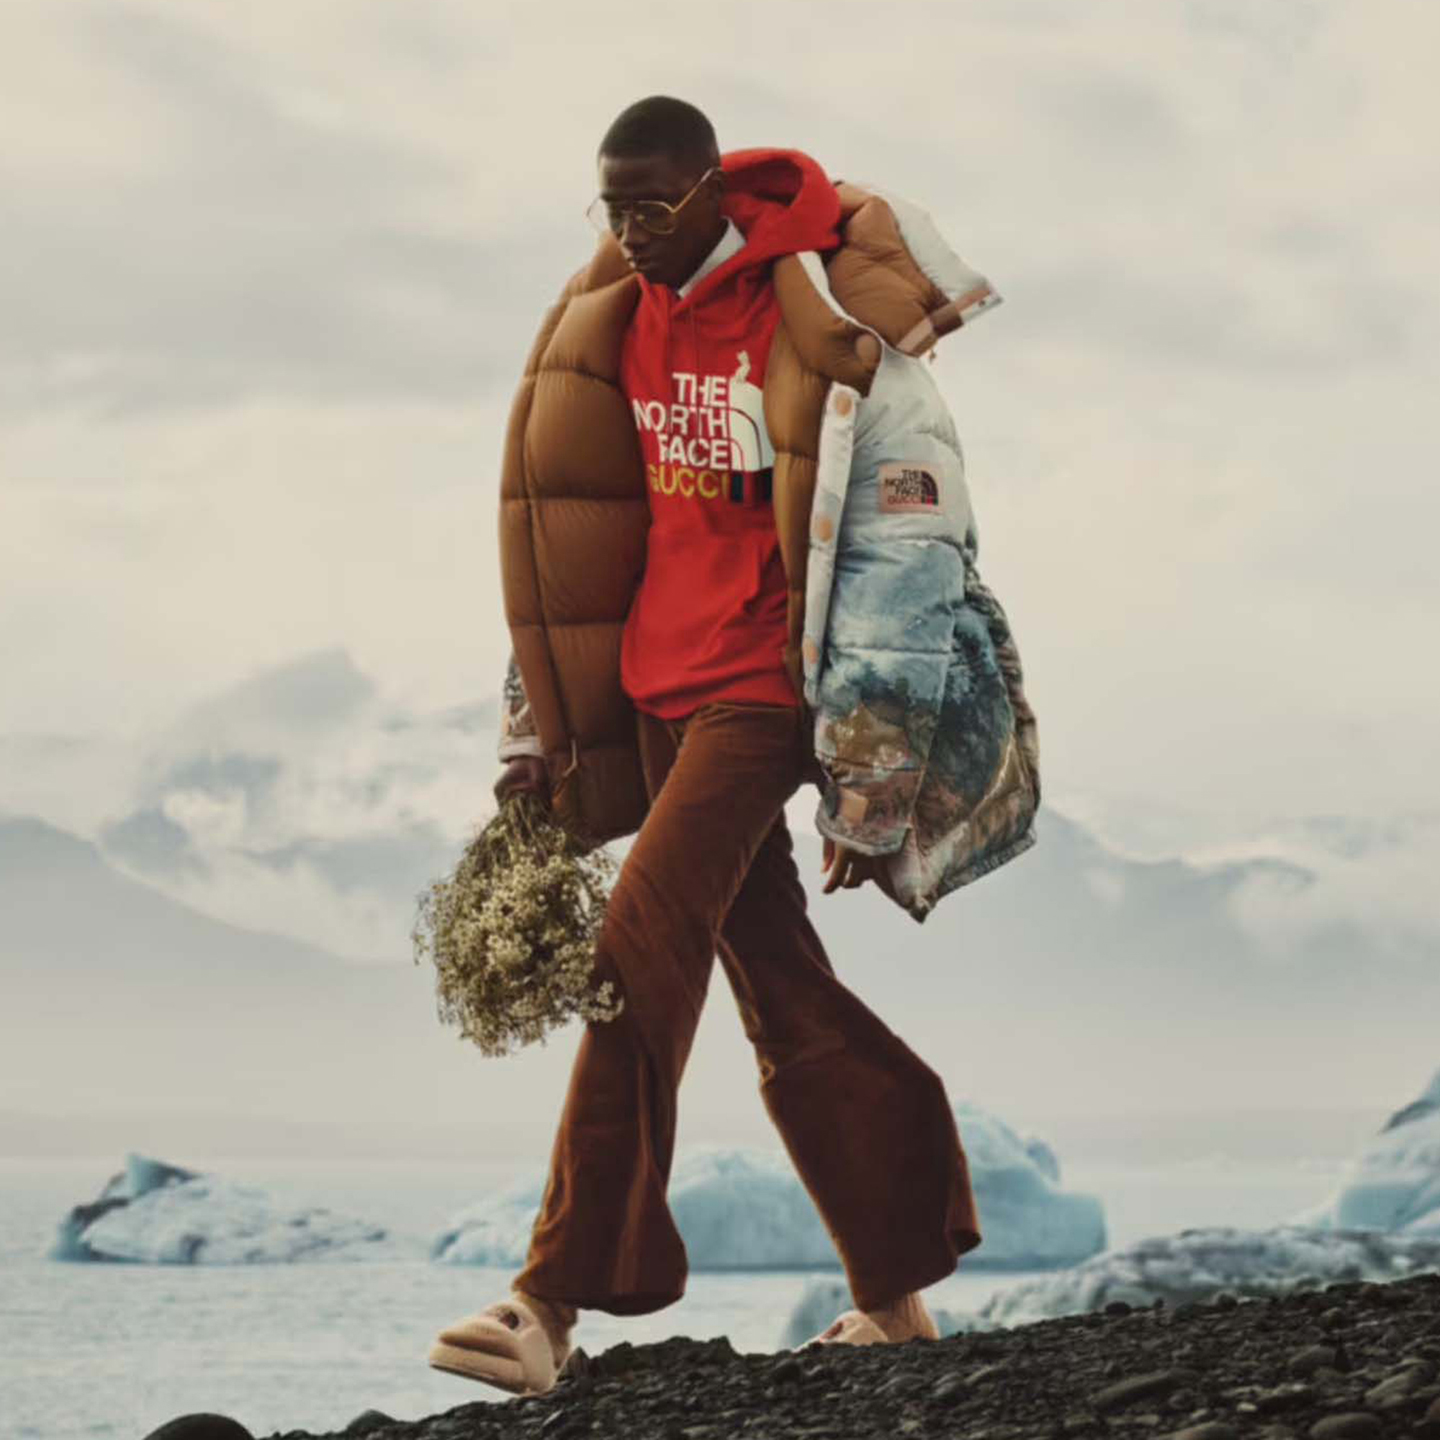 The North Face x Gucci Is Back and Less Affordable Than Ever